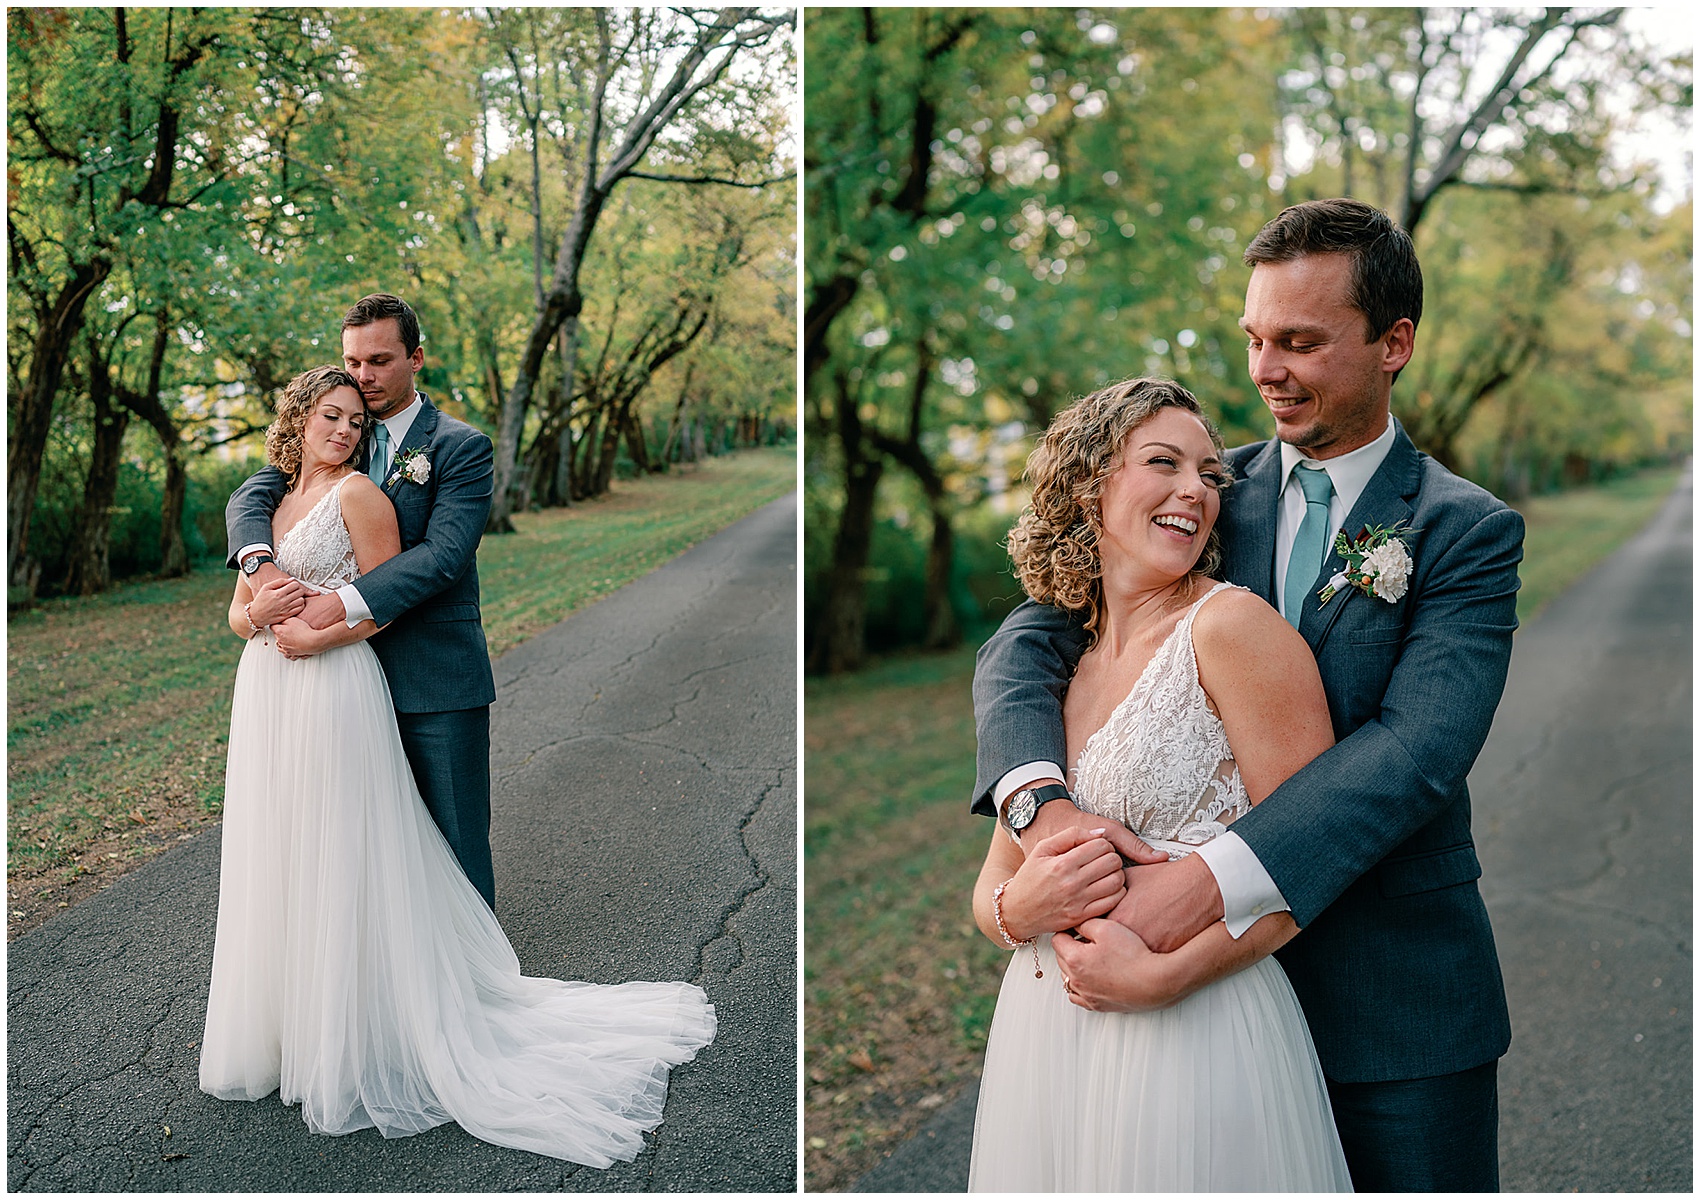 A bride leans into her groom on a paved path while smiling at the maple grove estate